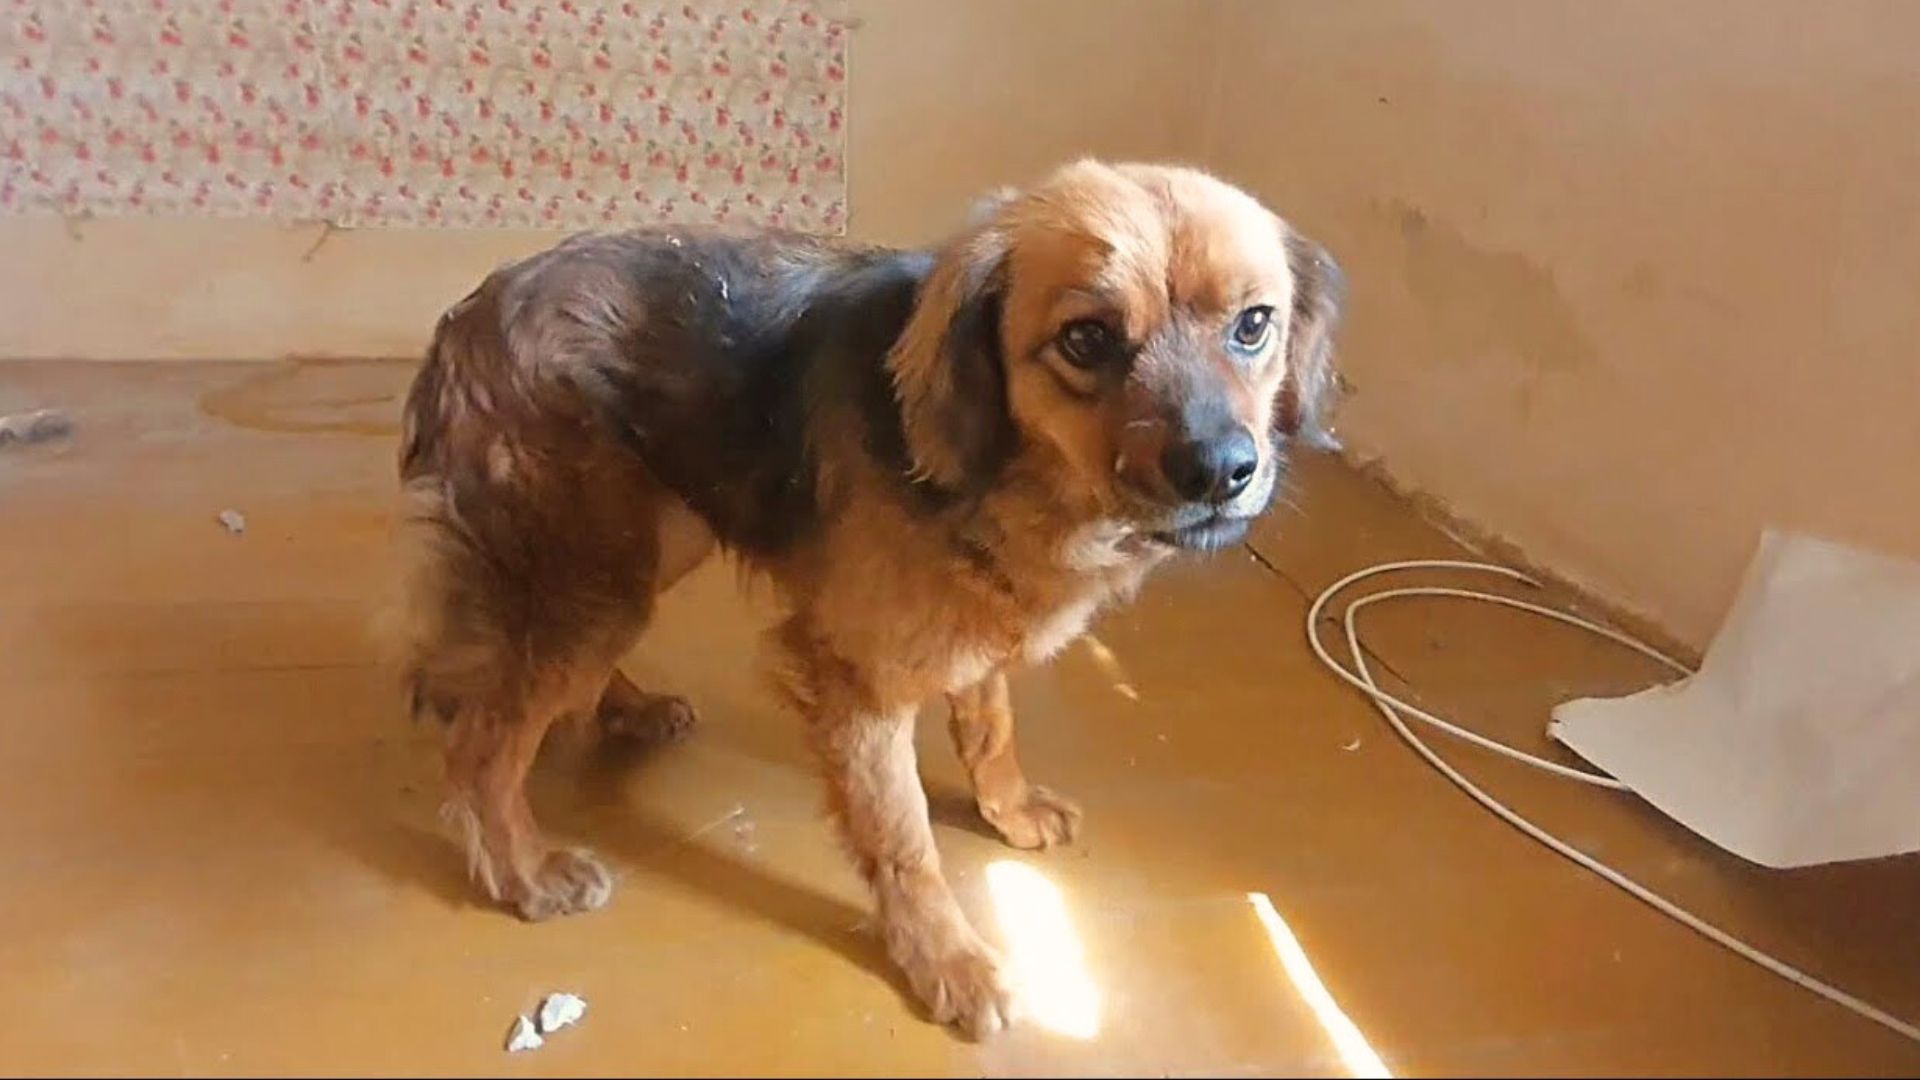 This Dog Was So Heartbroken When His Owner Passed Away That He Refused To Leave His House